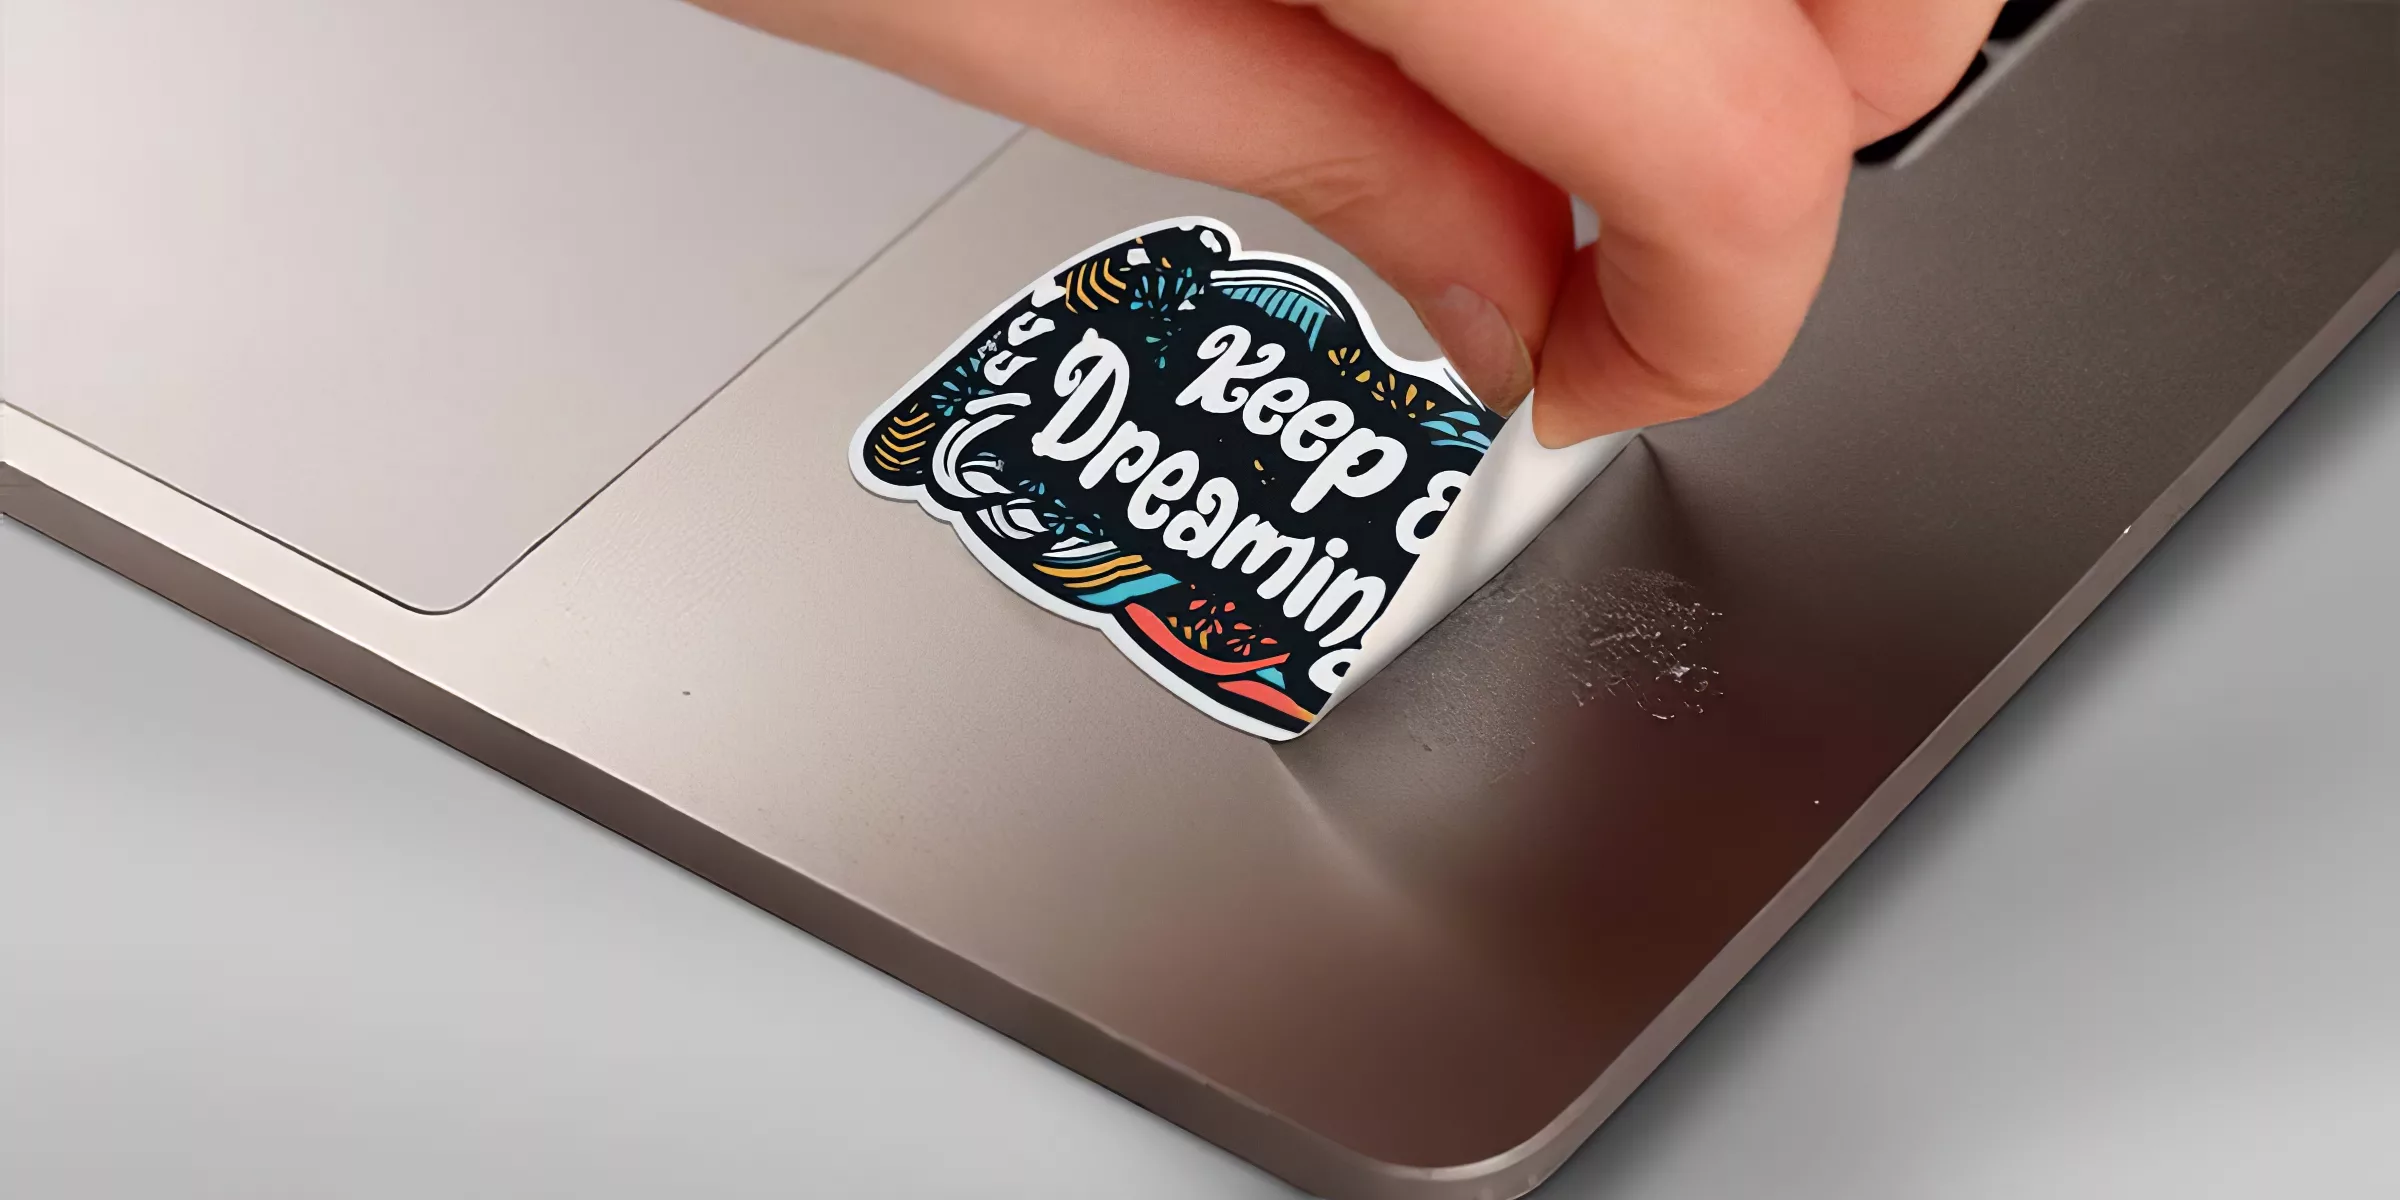 How to remove stickers from a laptop